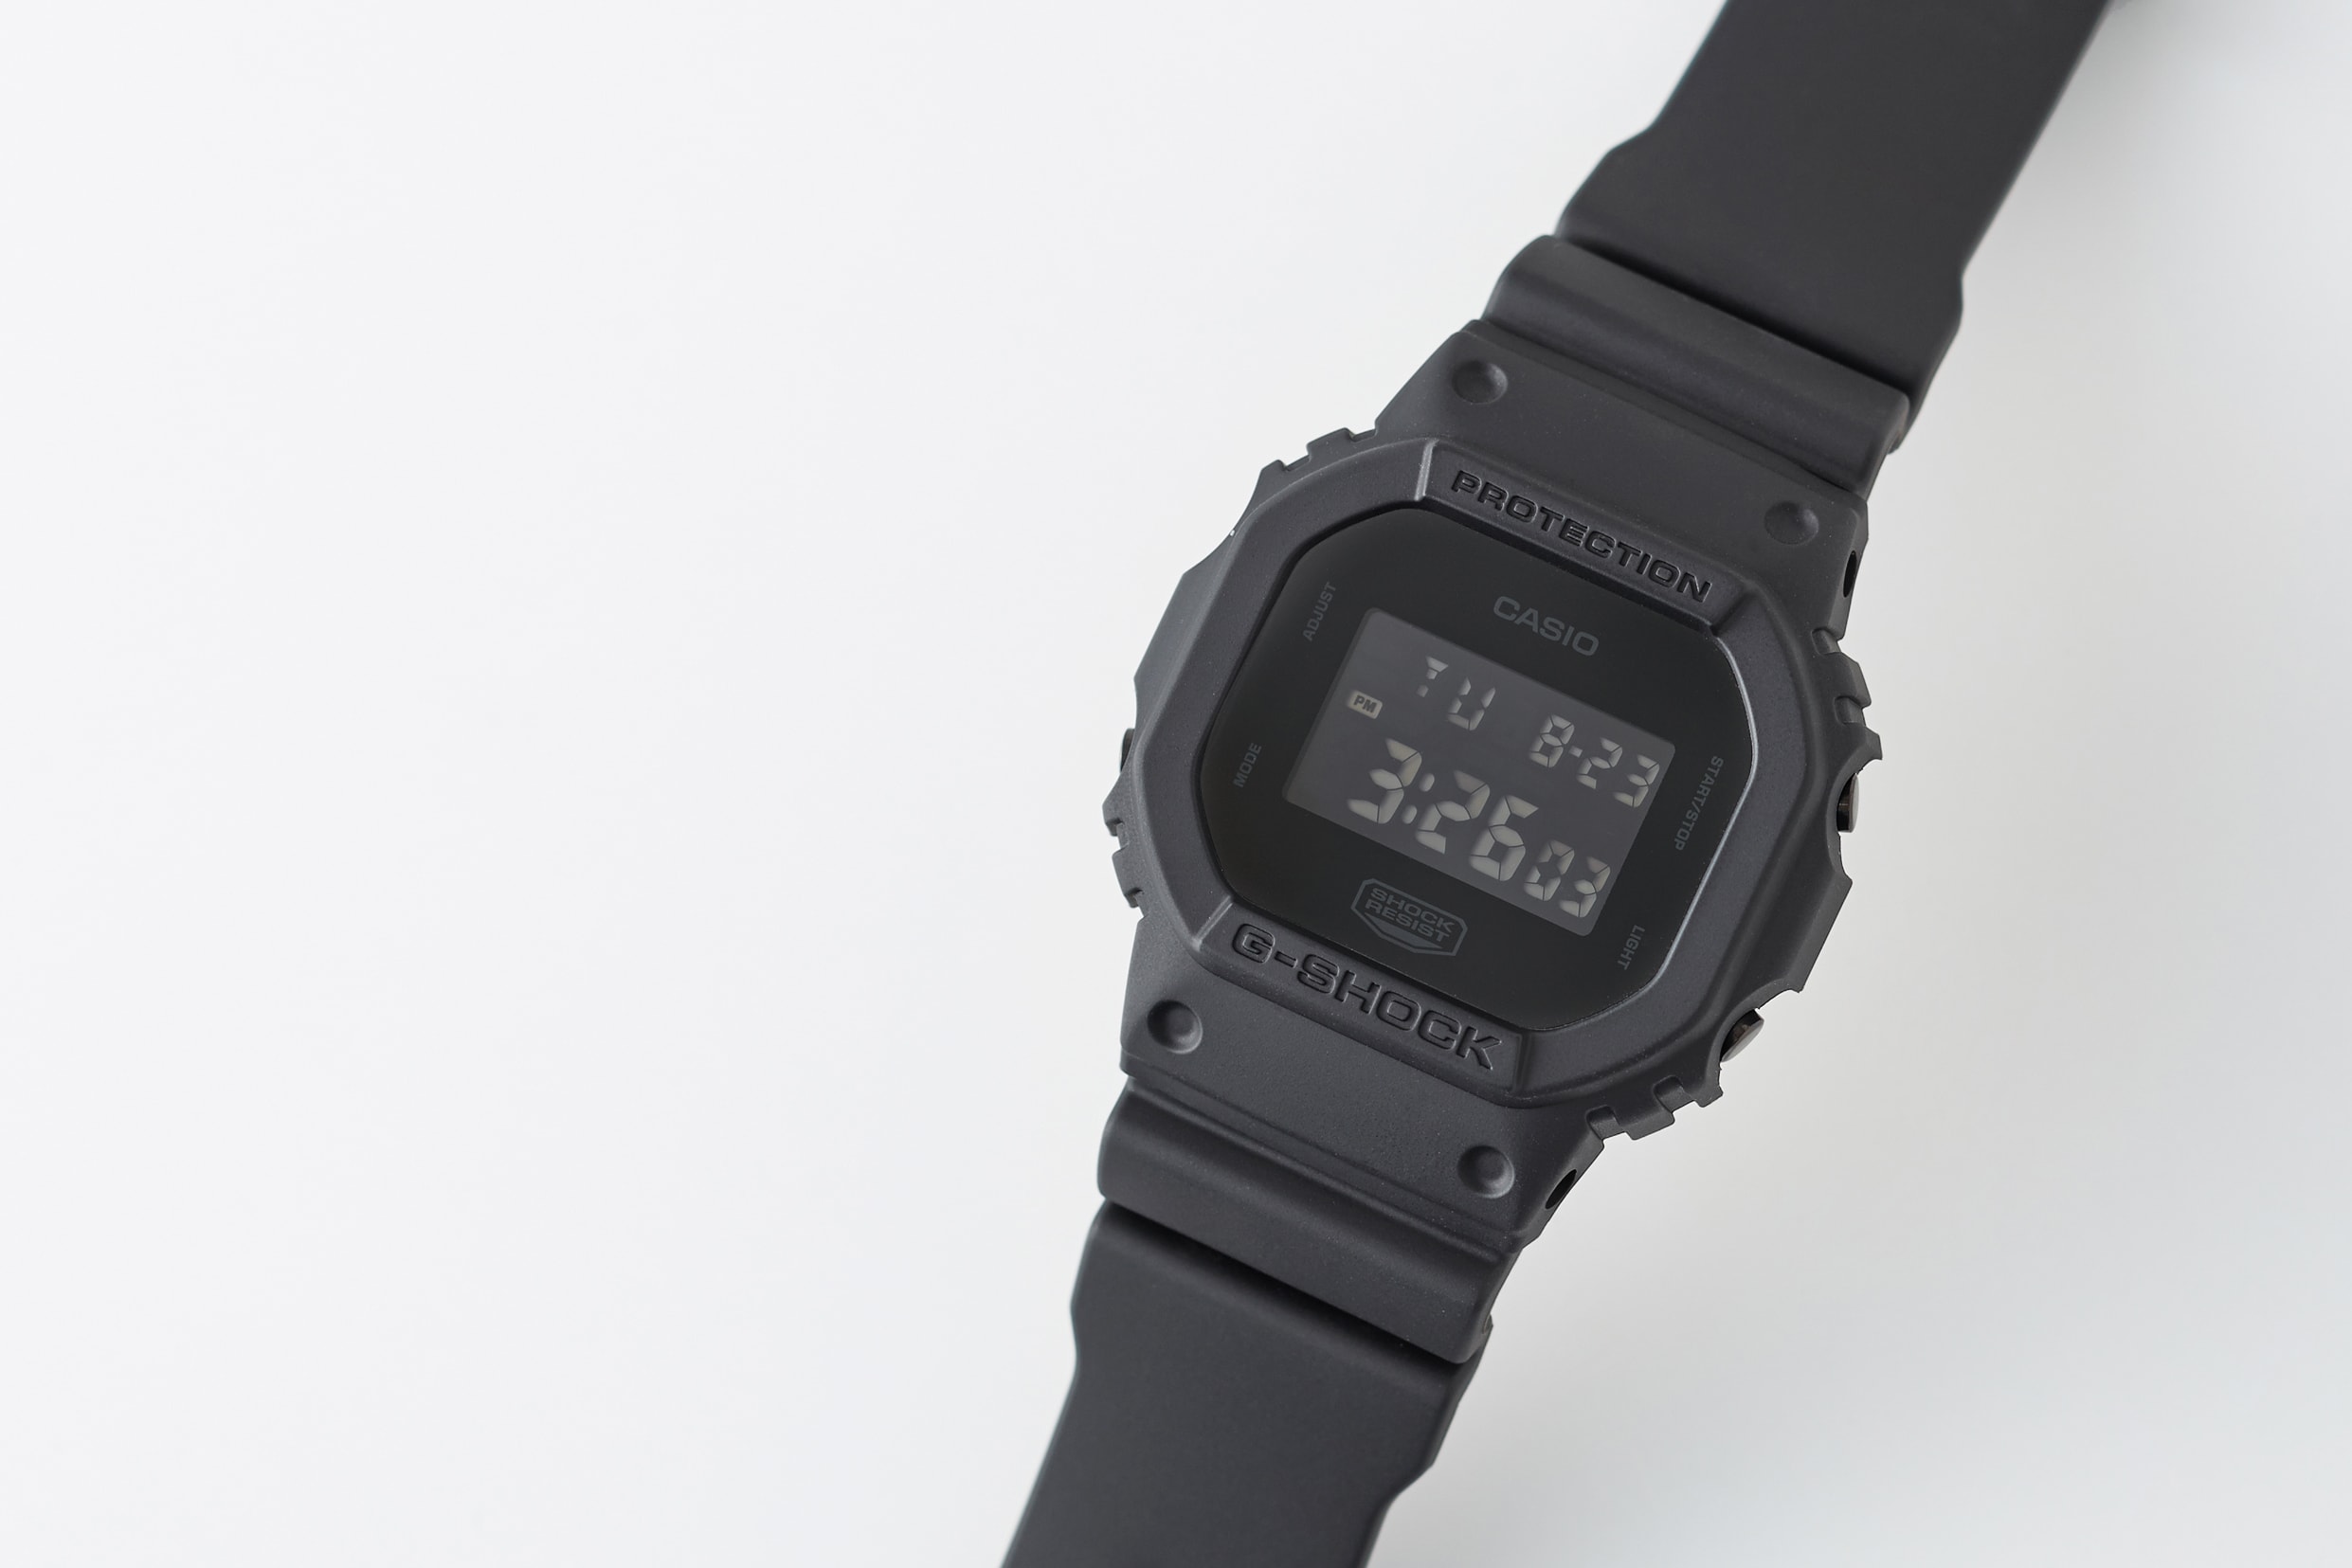 CASIO x URBAN RESEARCH DW-5600 will be released in Taipei on 30 November